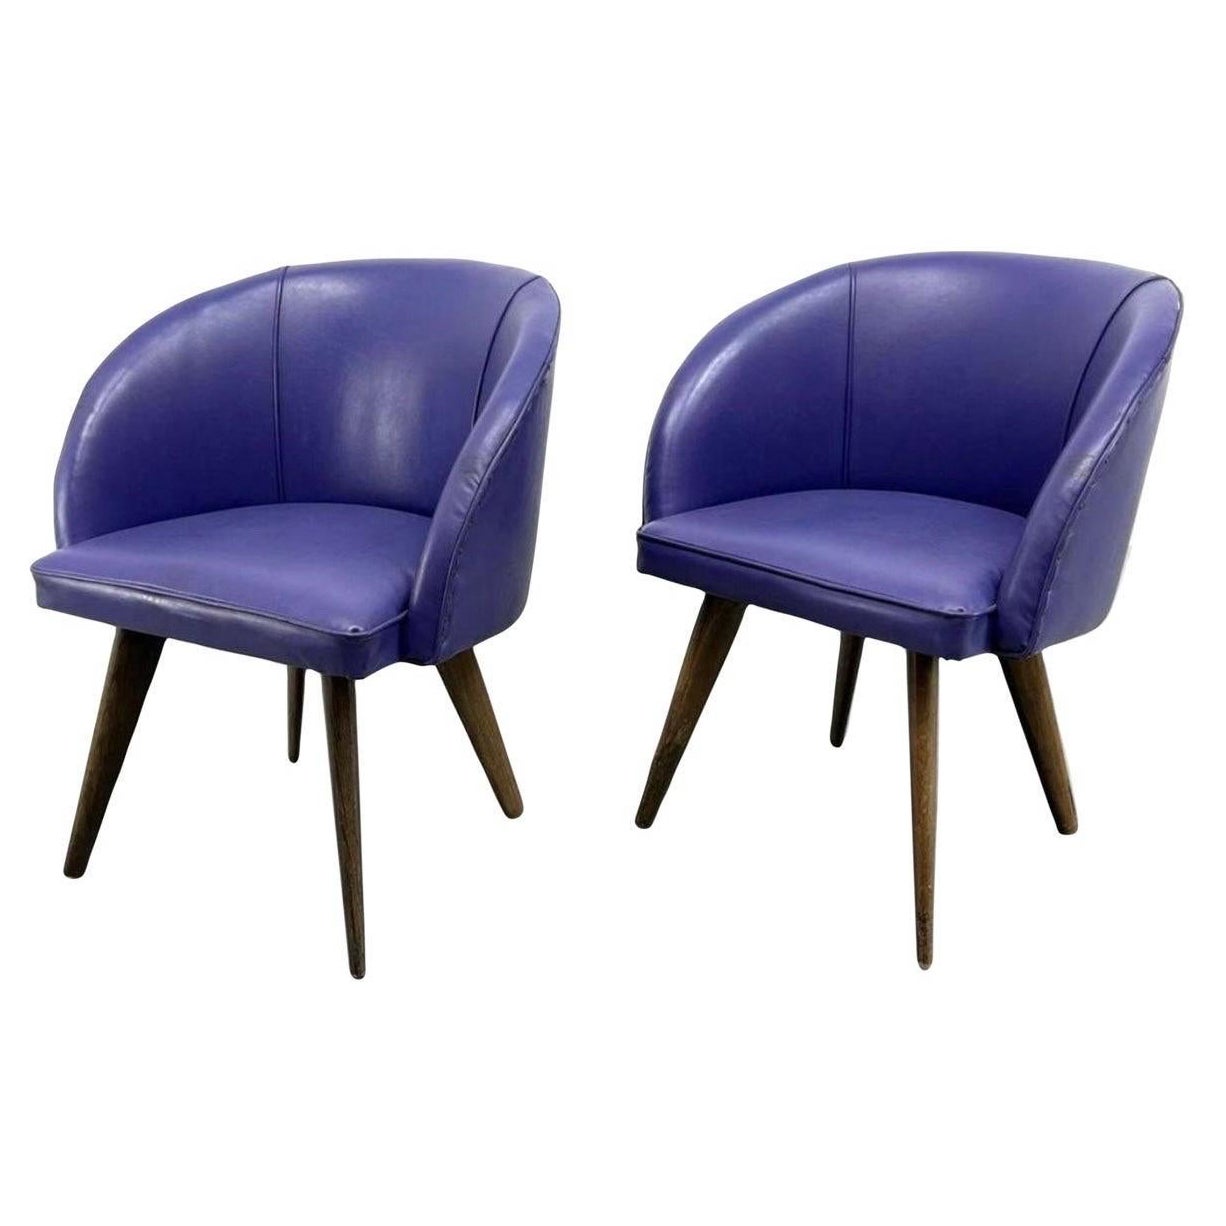 Danish Modern Purple Upholstered Barrel Tub Chairs - a Pair For Sale